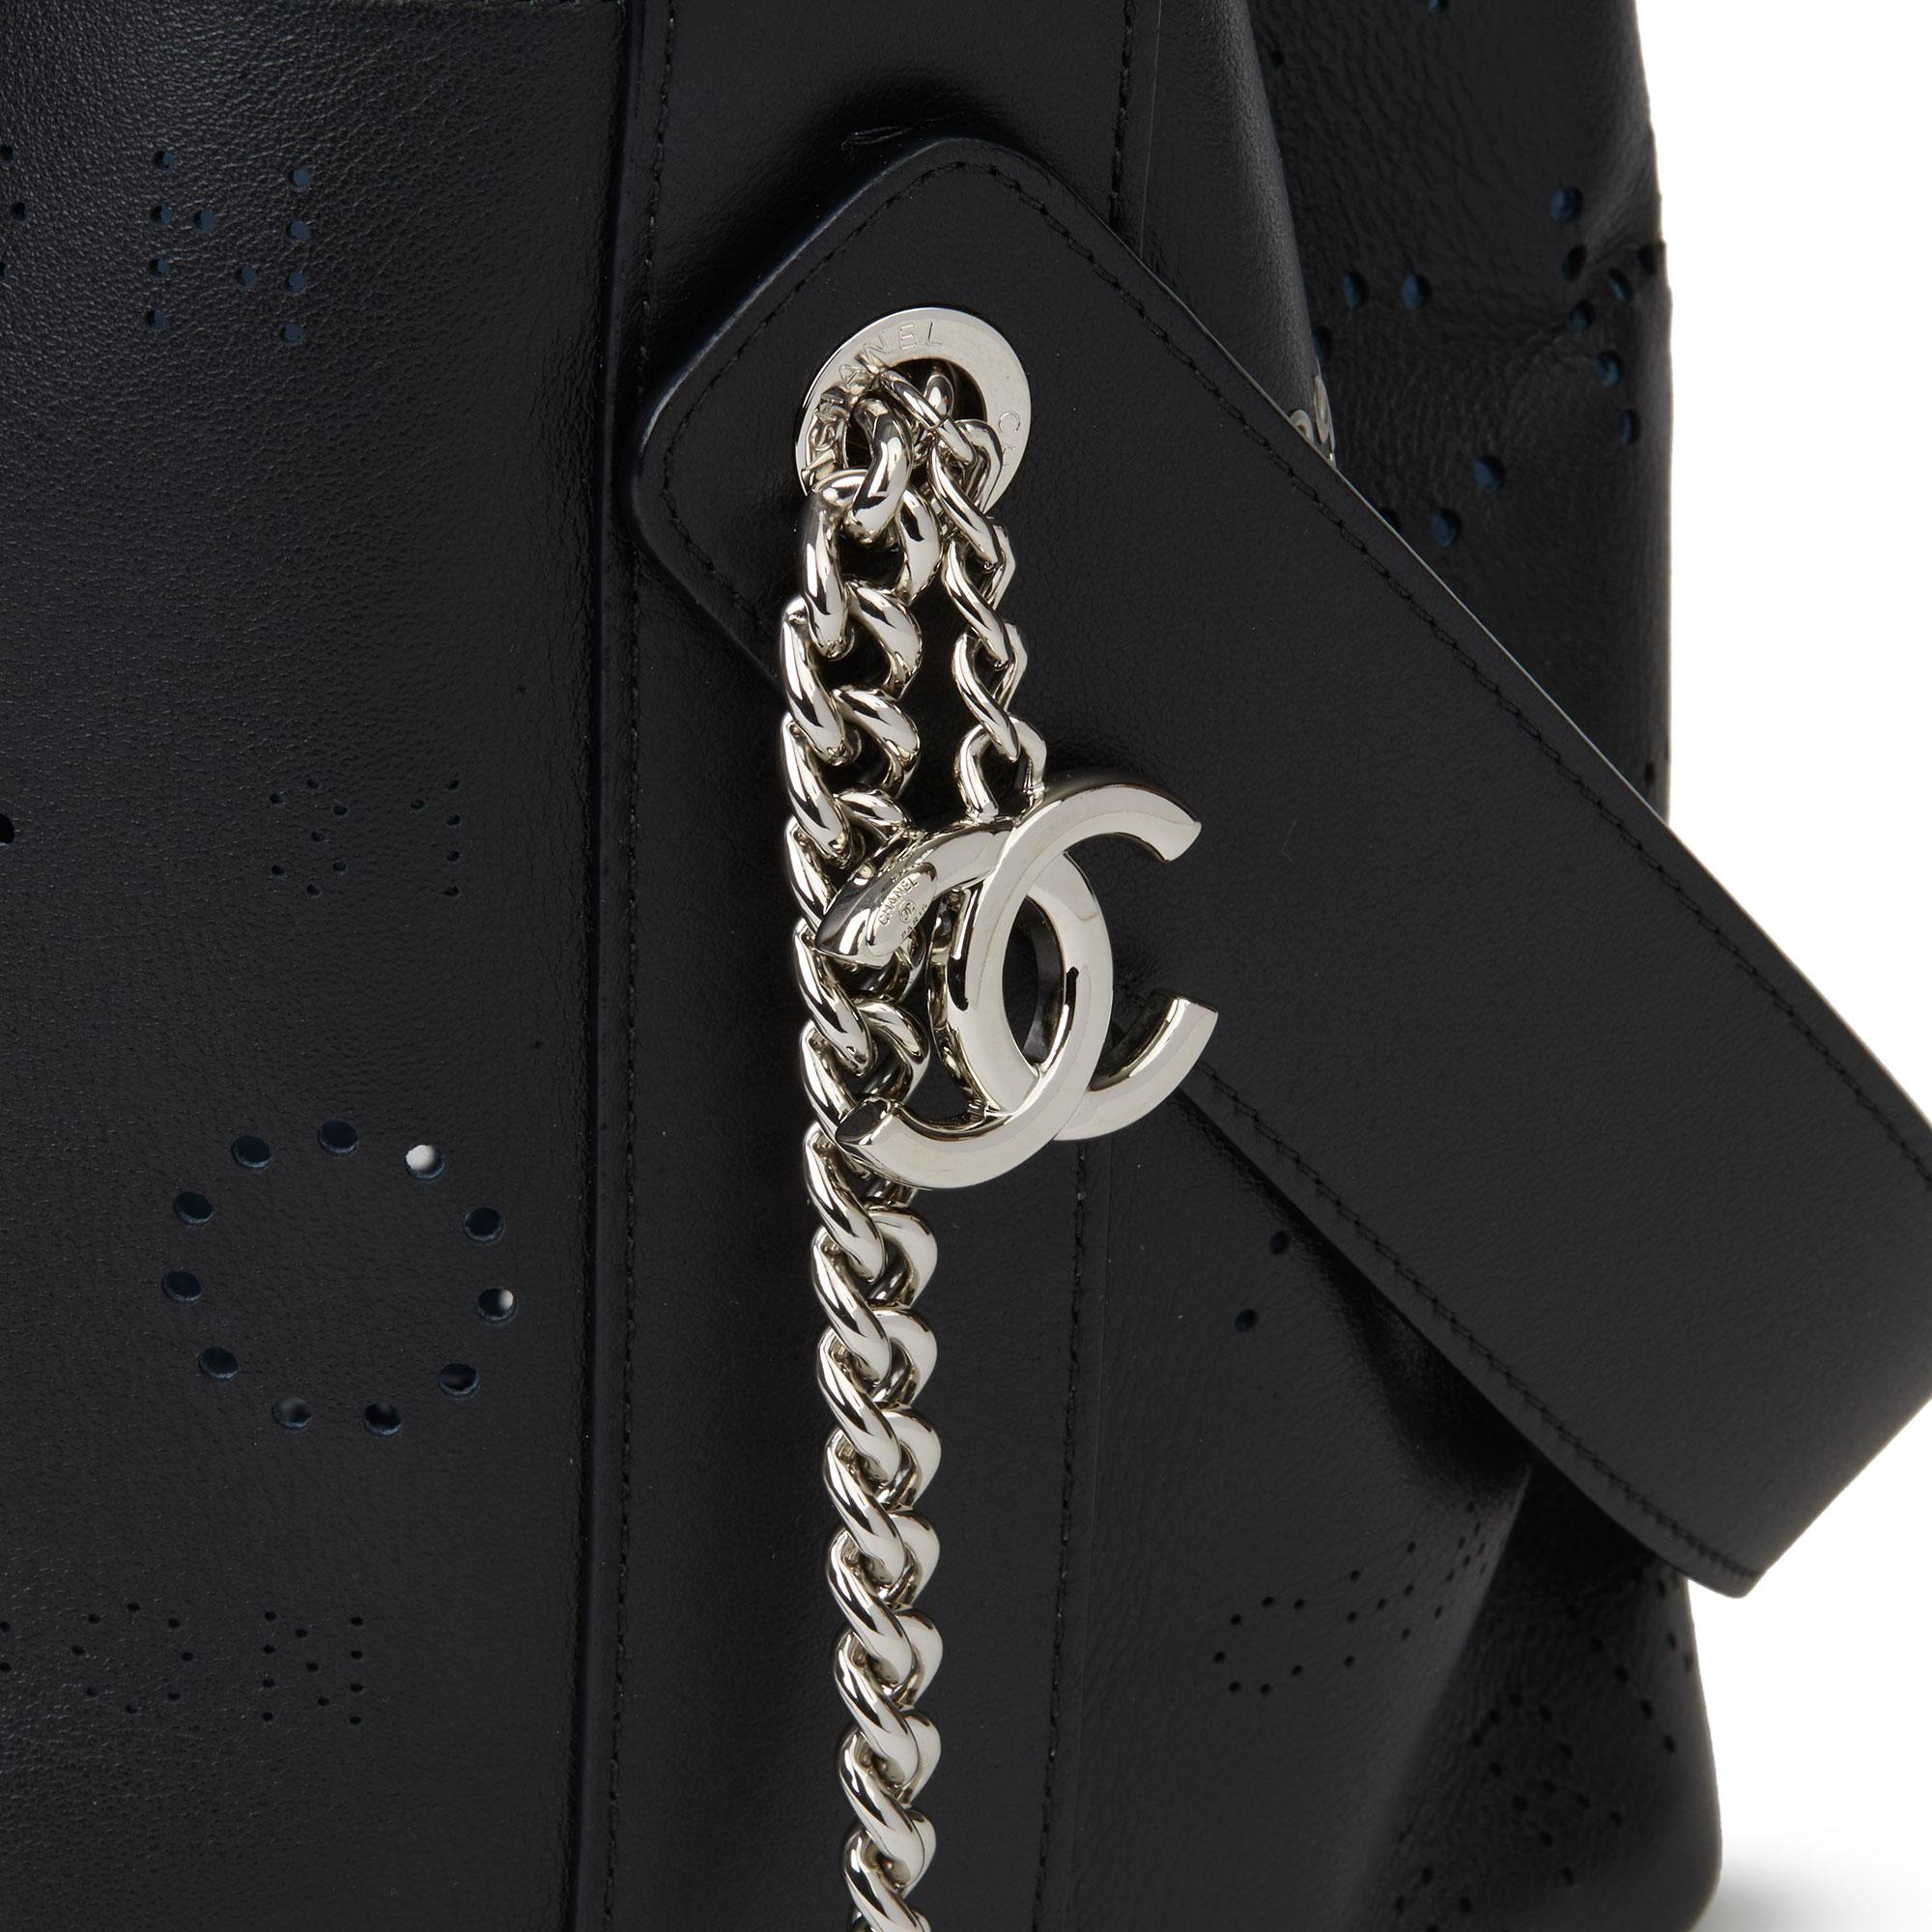 Women's 2019 Chanel Black Perforated Calfskin Logo Eyelets Bucket Bag with Tweed Pouch